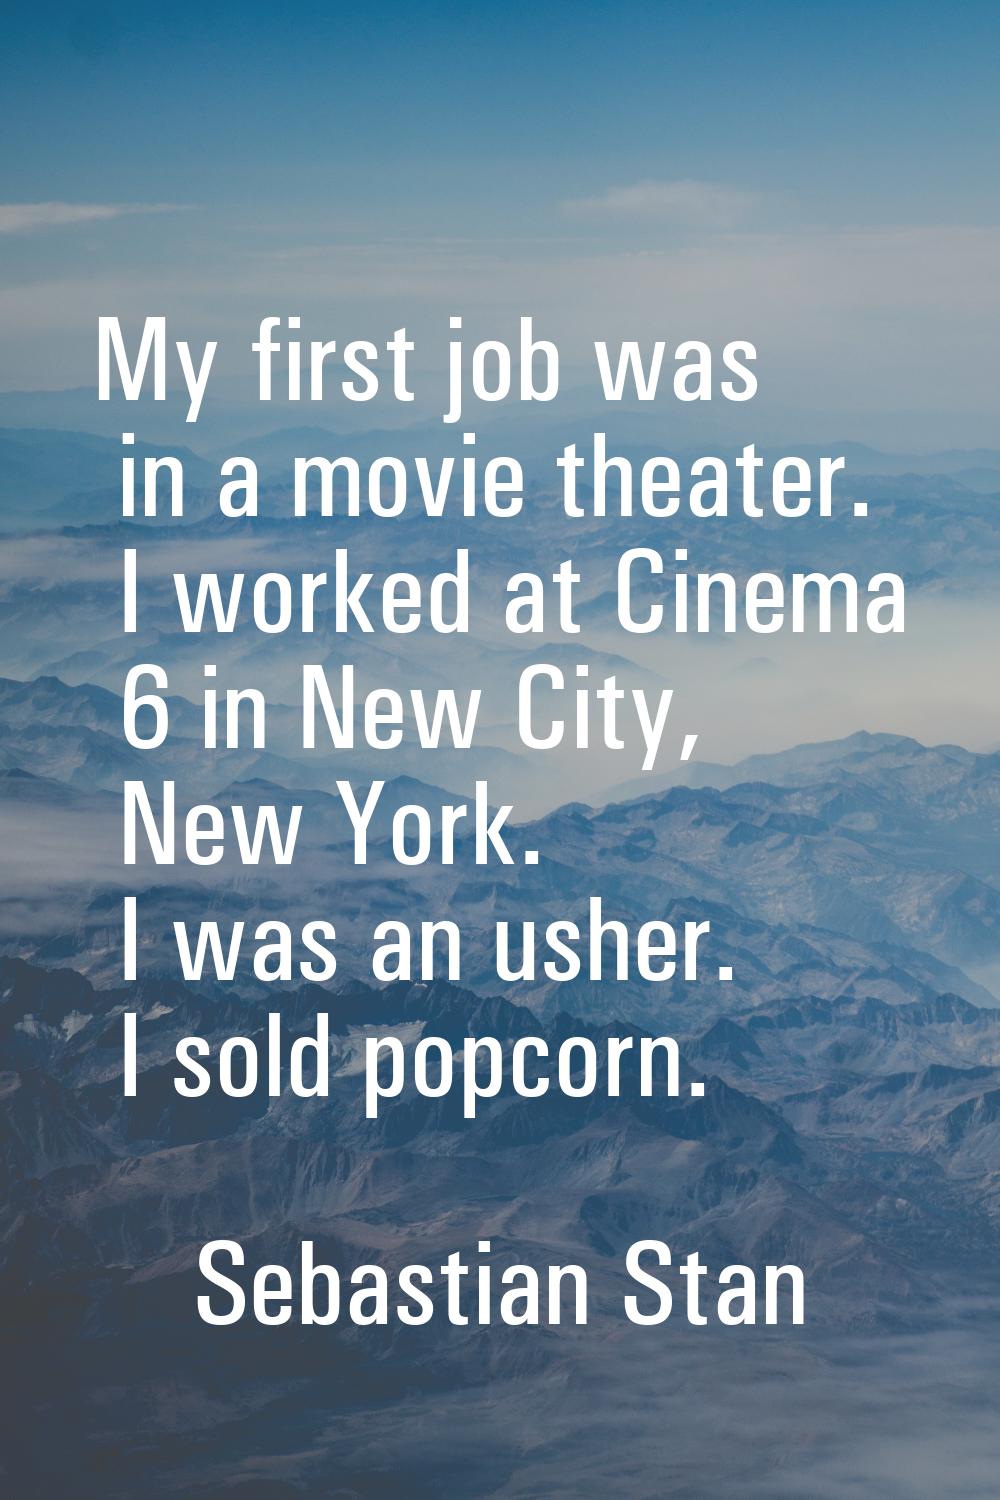 My first job was in a movie theater. I worked at Cinema 6 in New City, New York. I was an usher. I 